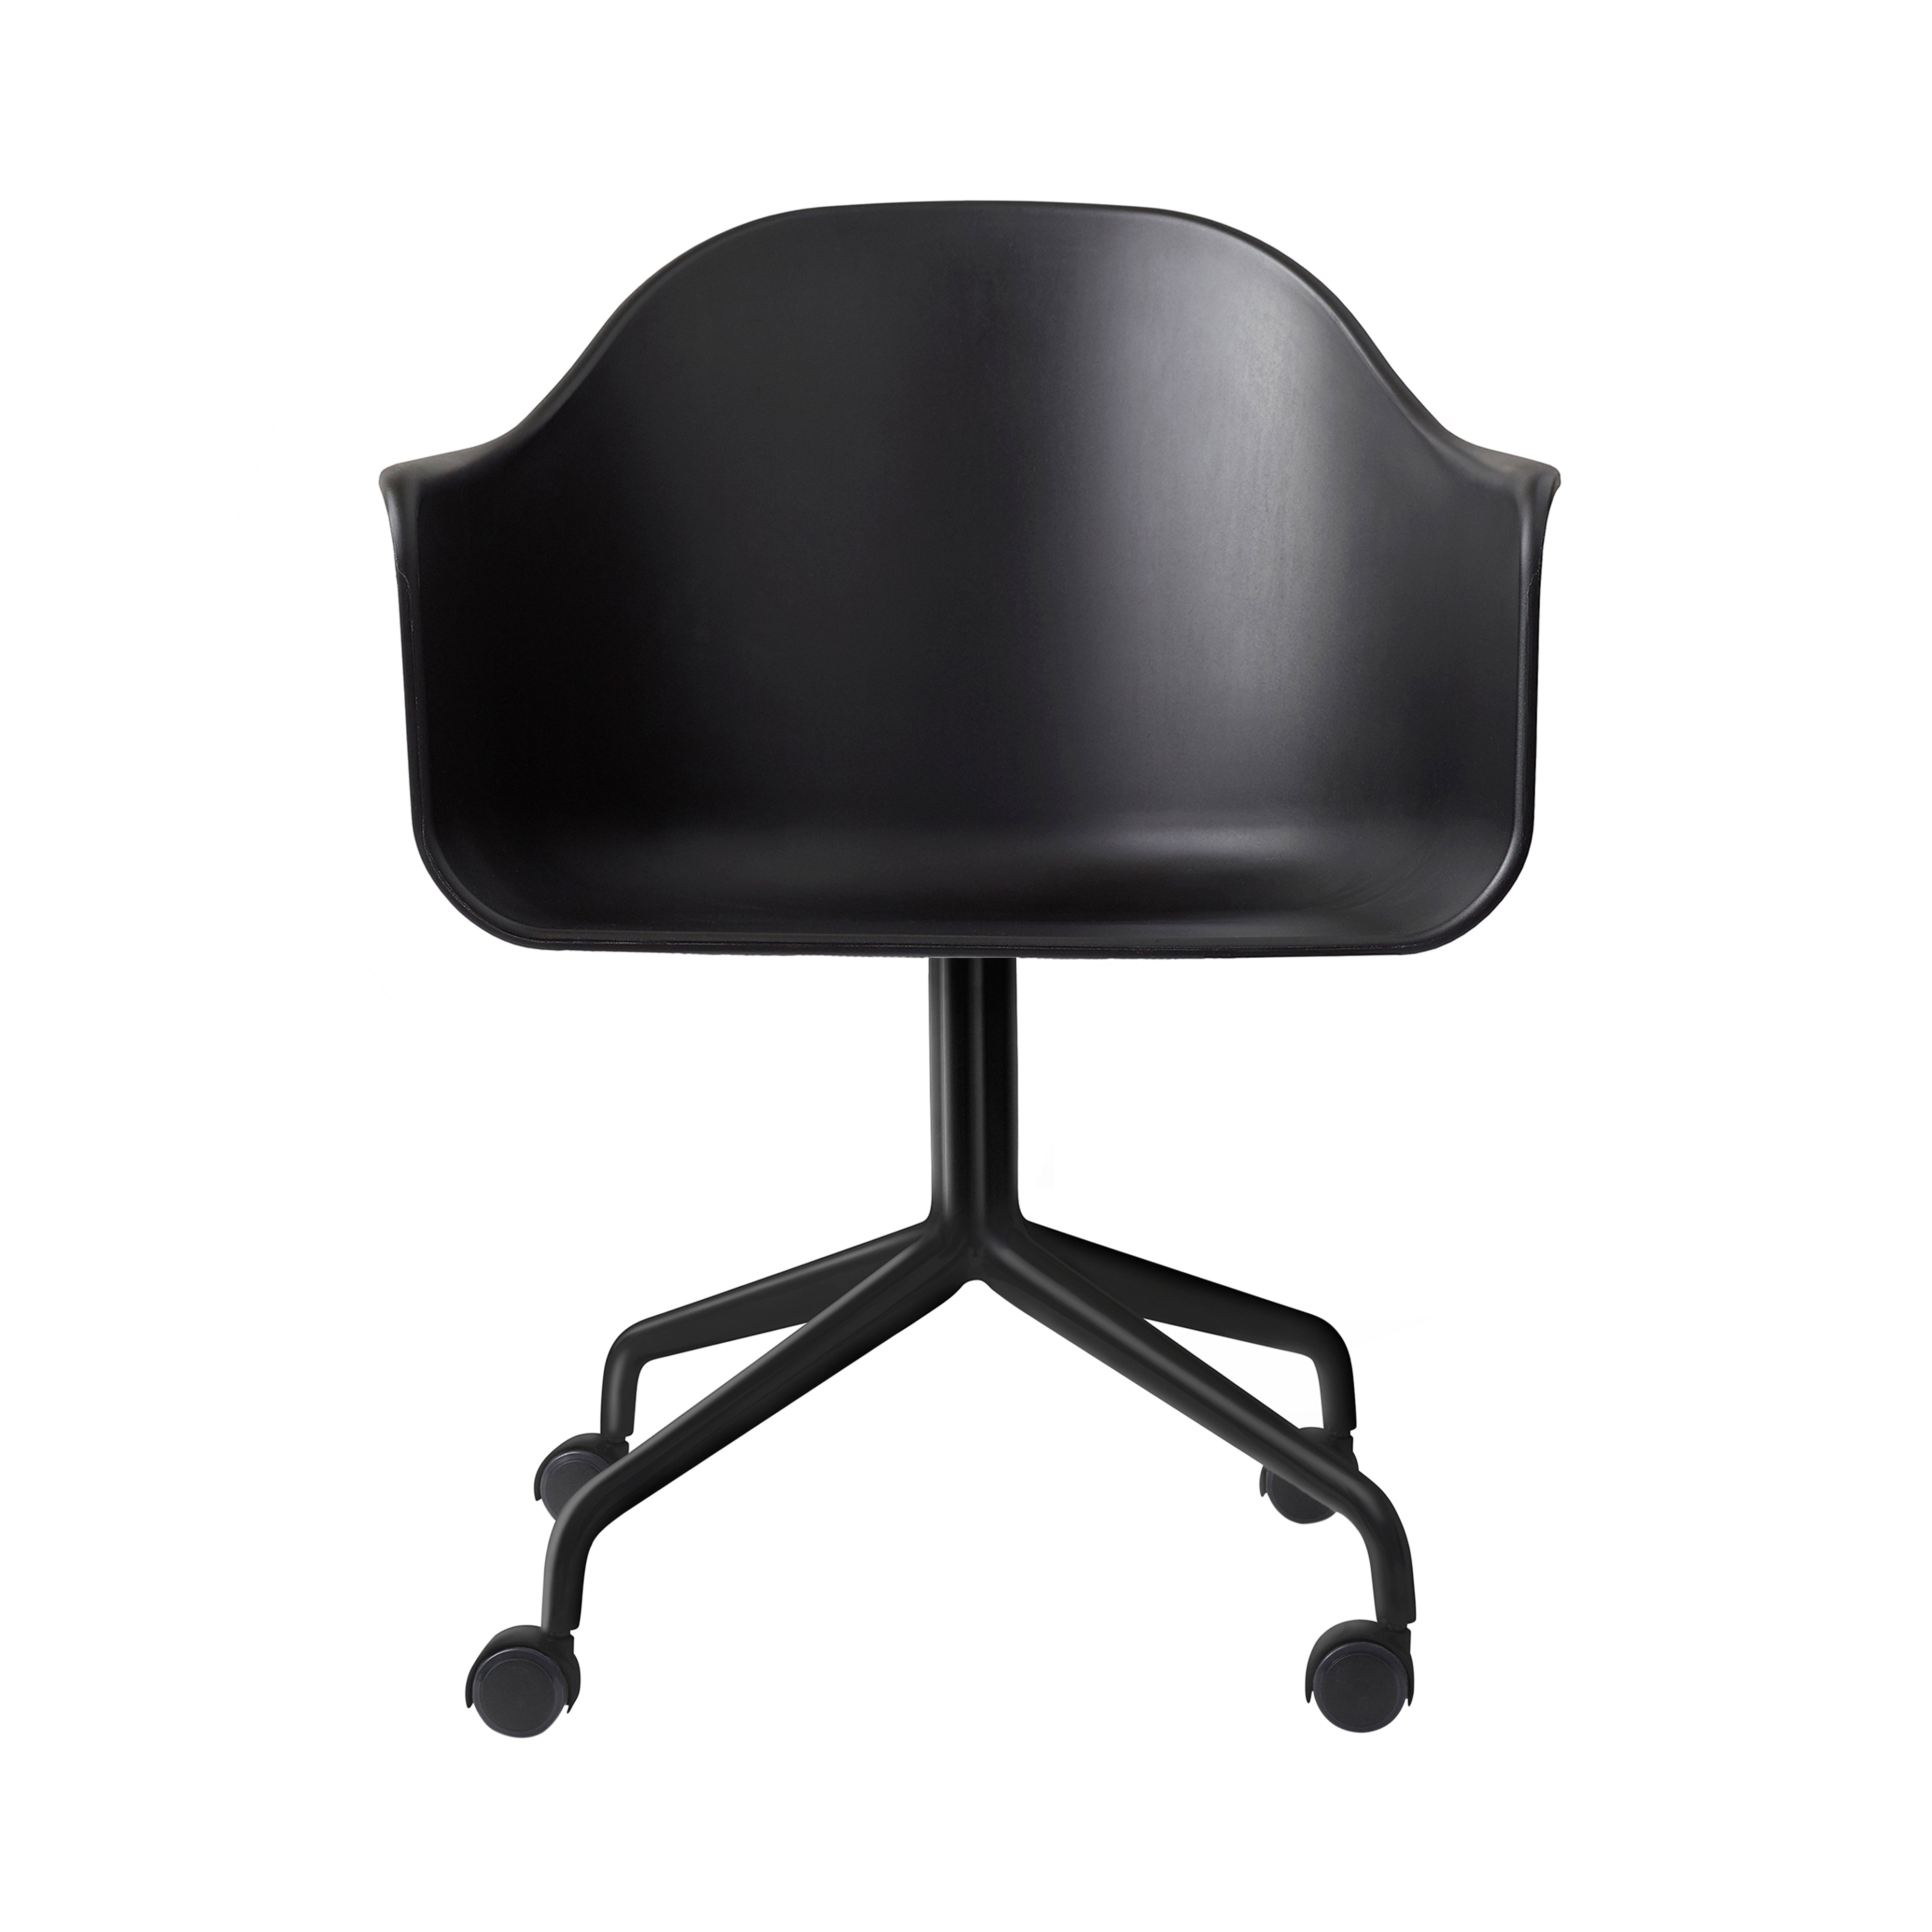 Harbour Dining Chair Star Base with Casters: Black Steel + Black